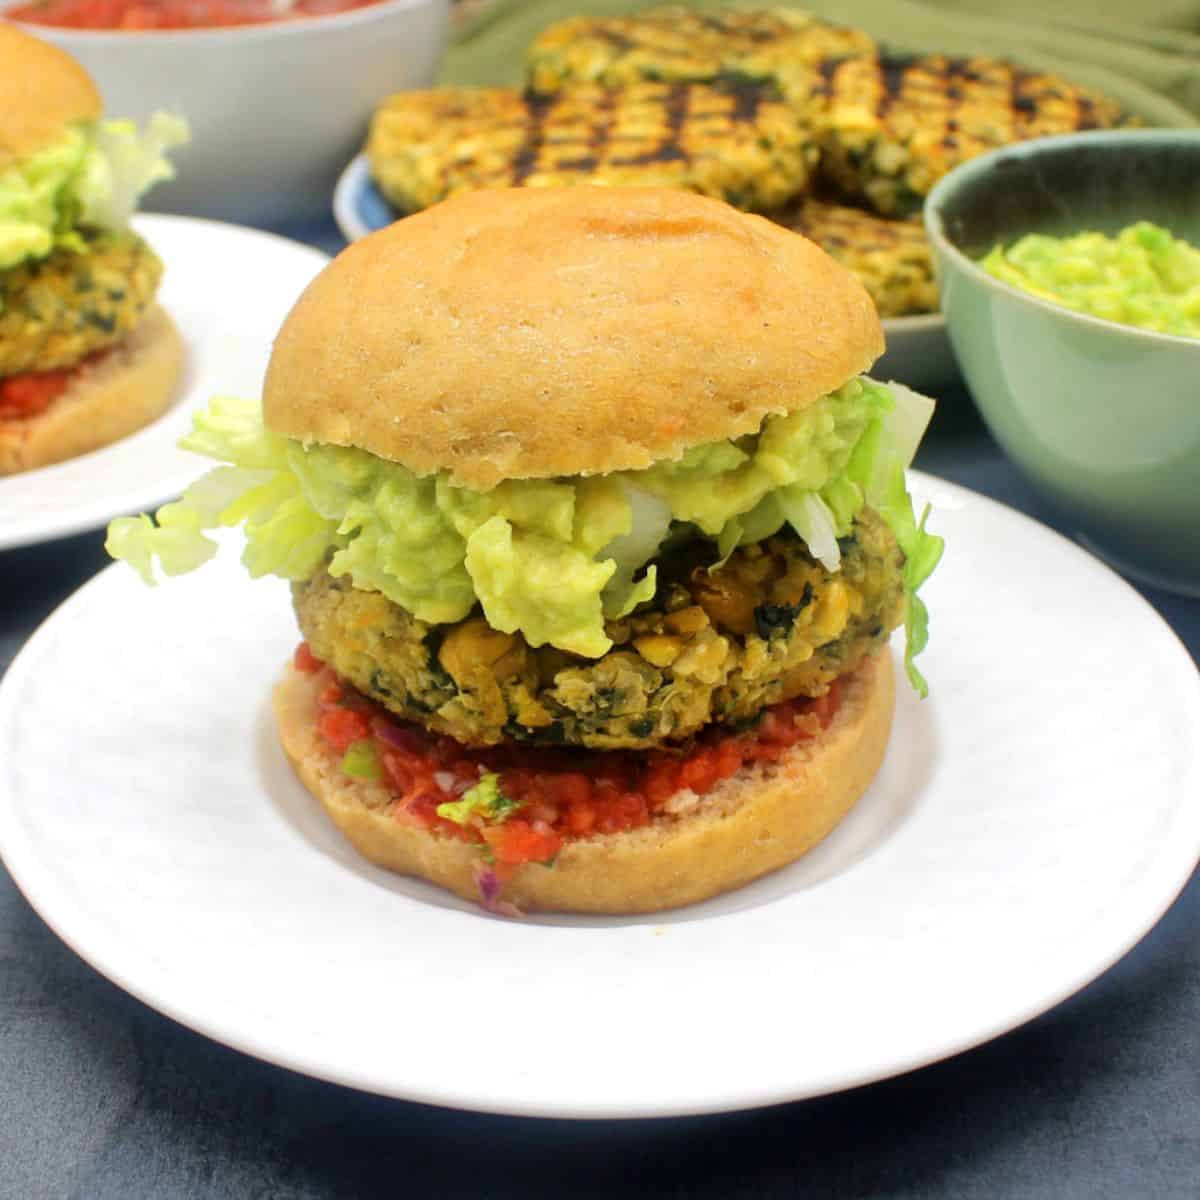 Chickpea quinoa burgers on white plates with toppings in background.